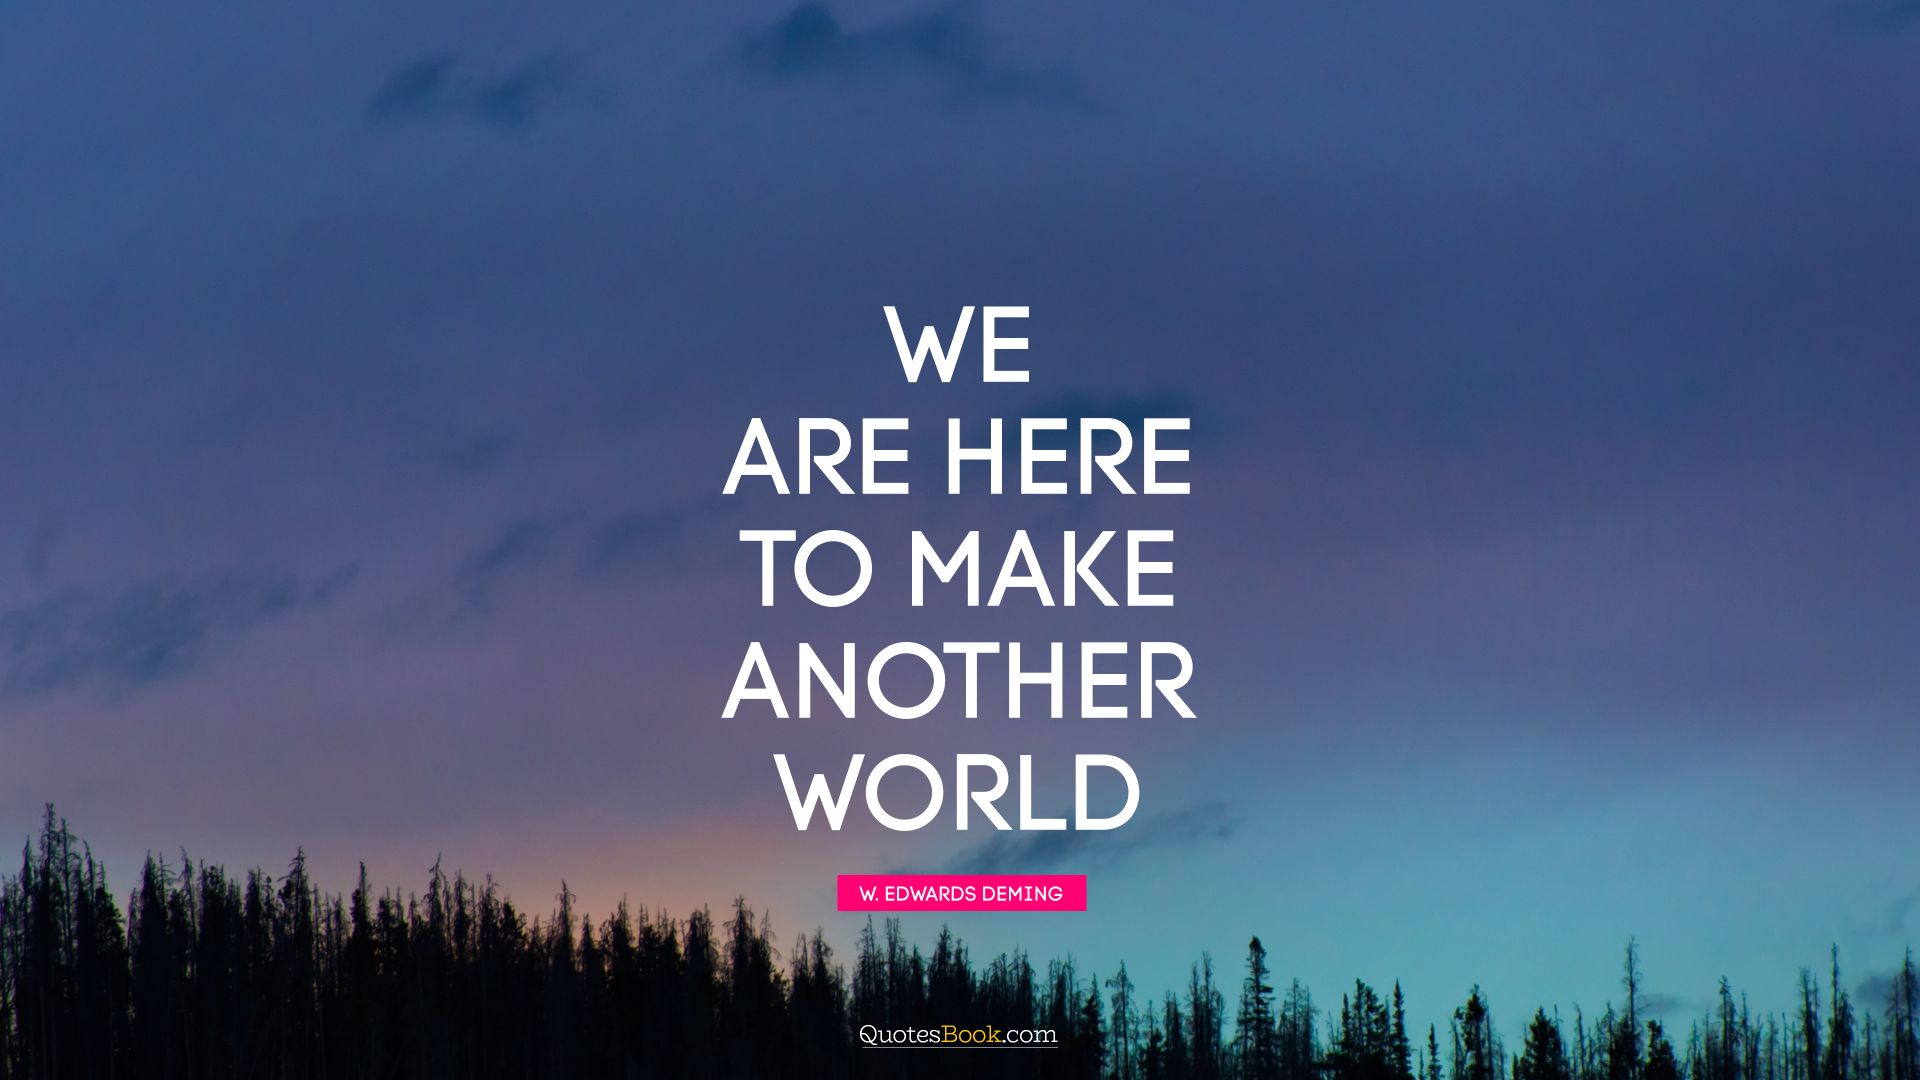 We are here to make another world. - Quote by W. Edwards Deming